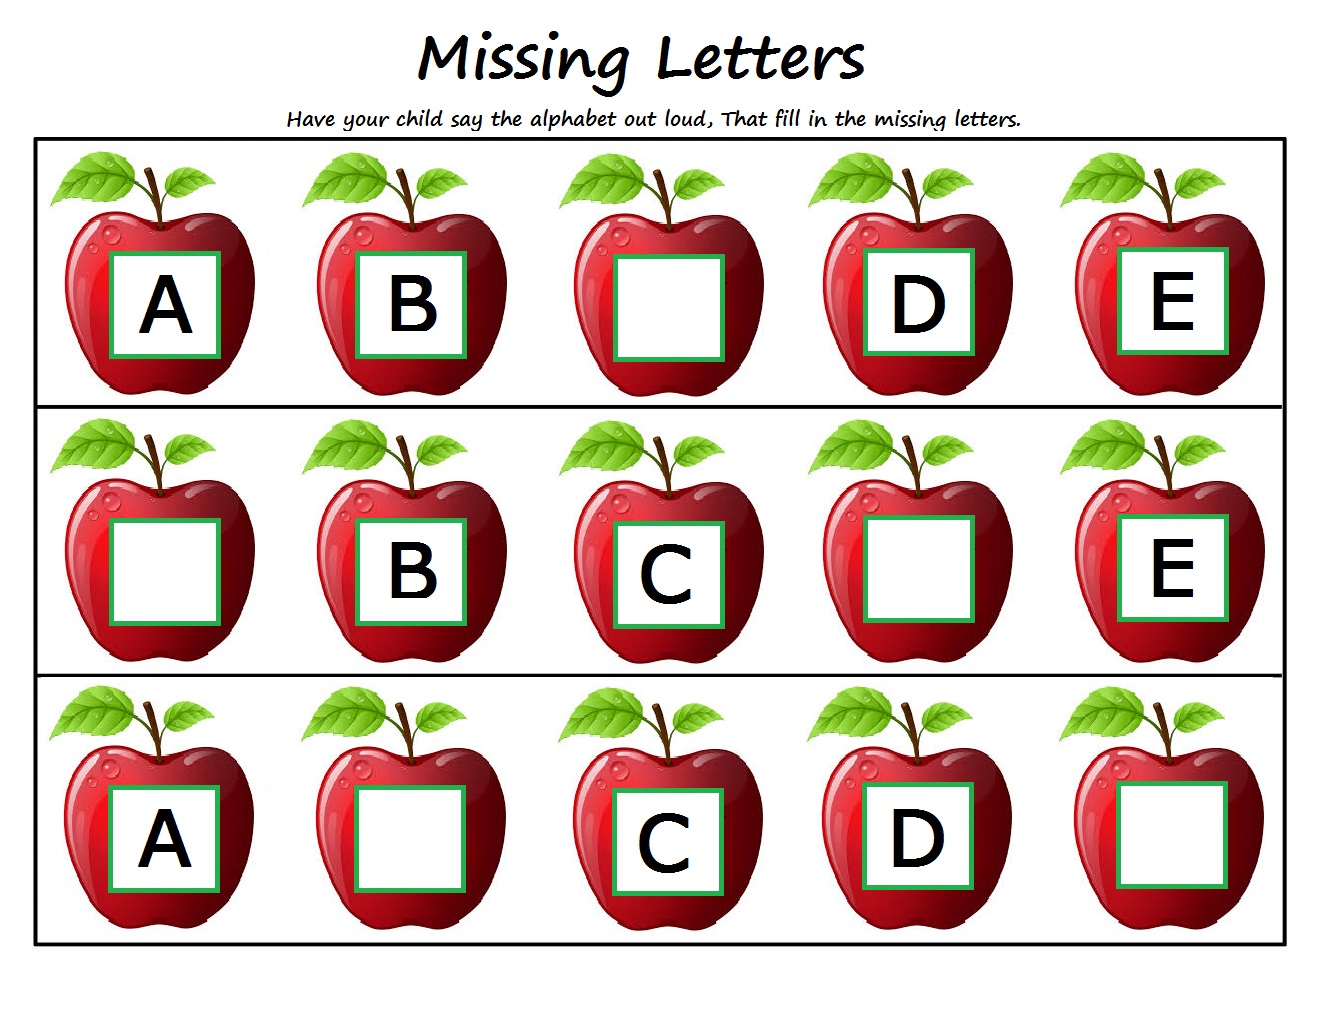 kindergarten-worksheets-kindergarten-worksheets-missing-letters